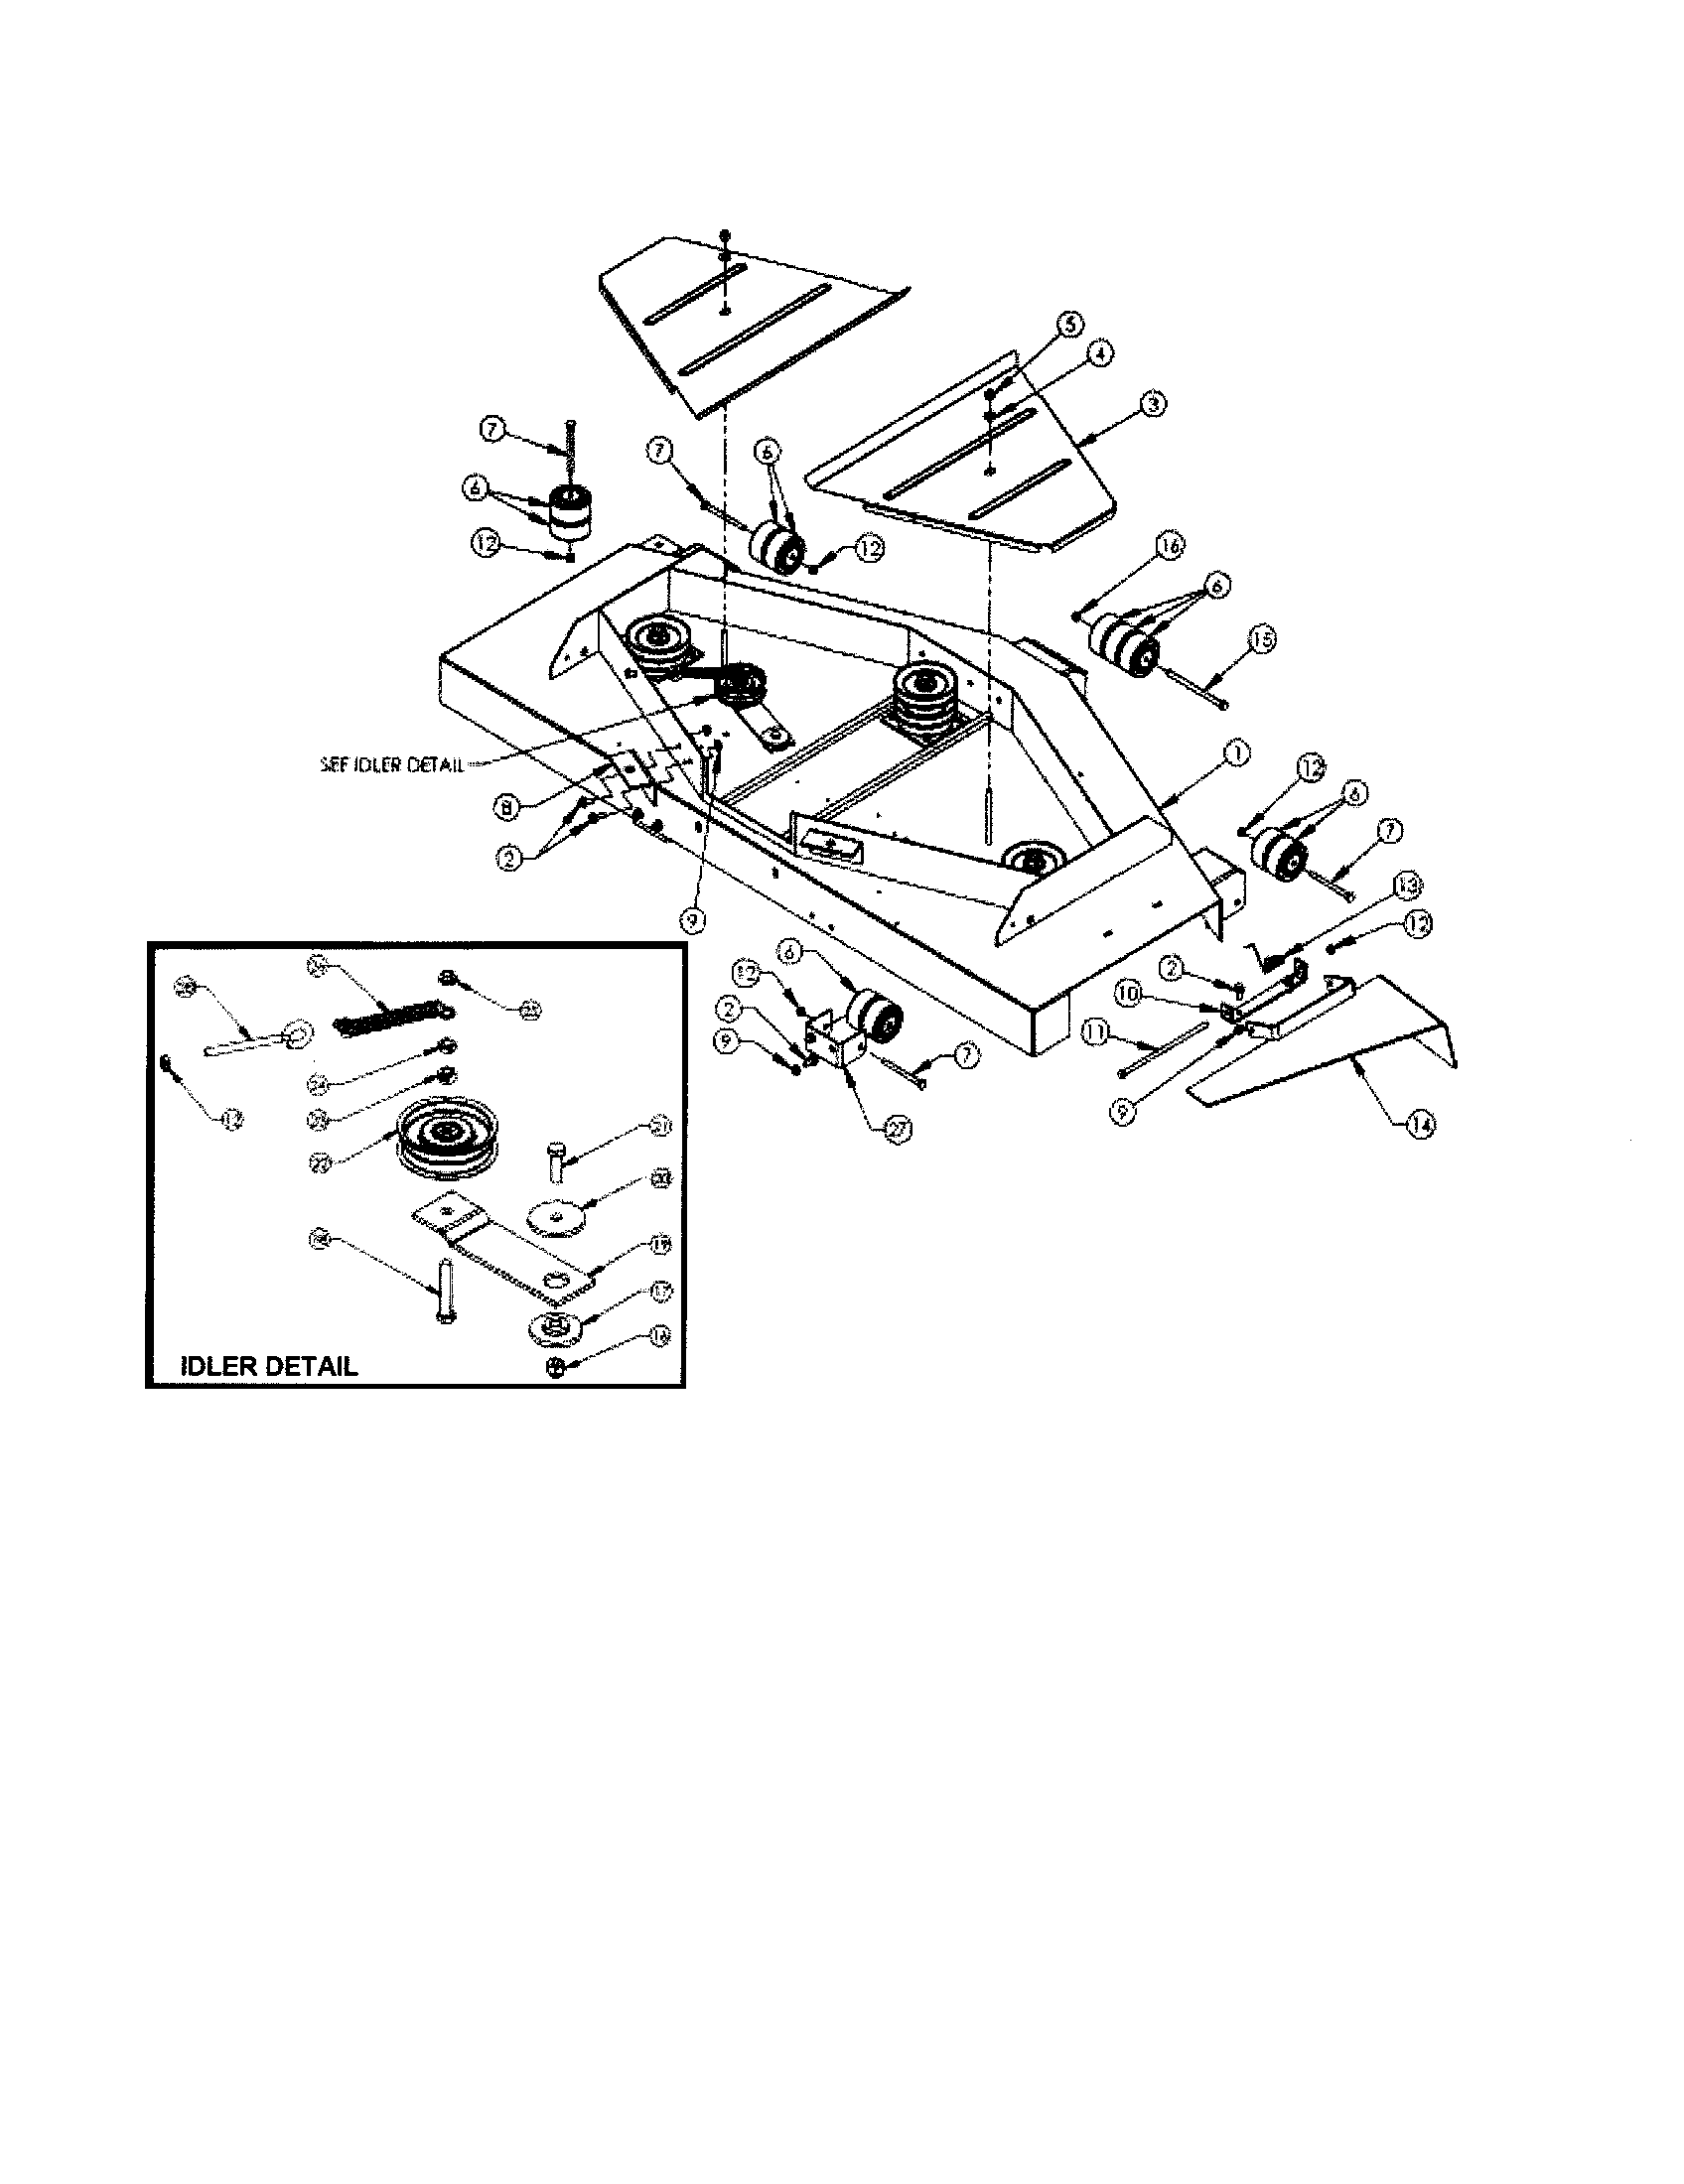 wiring diagram for snapper riding mower 2000 gx